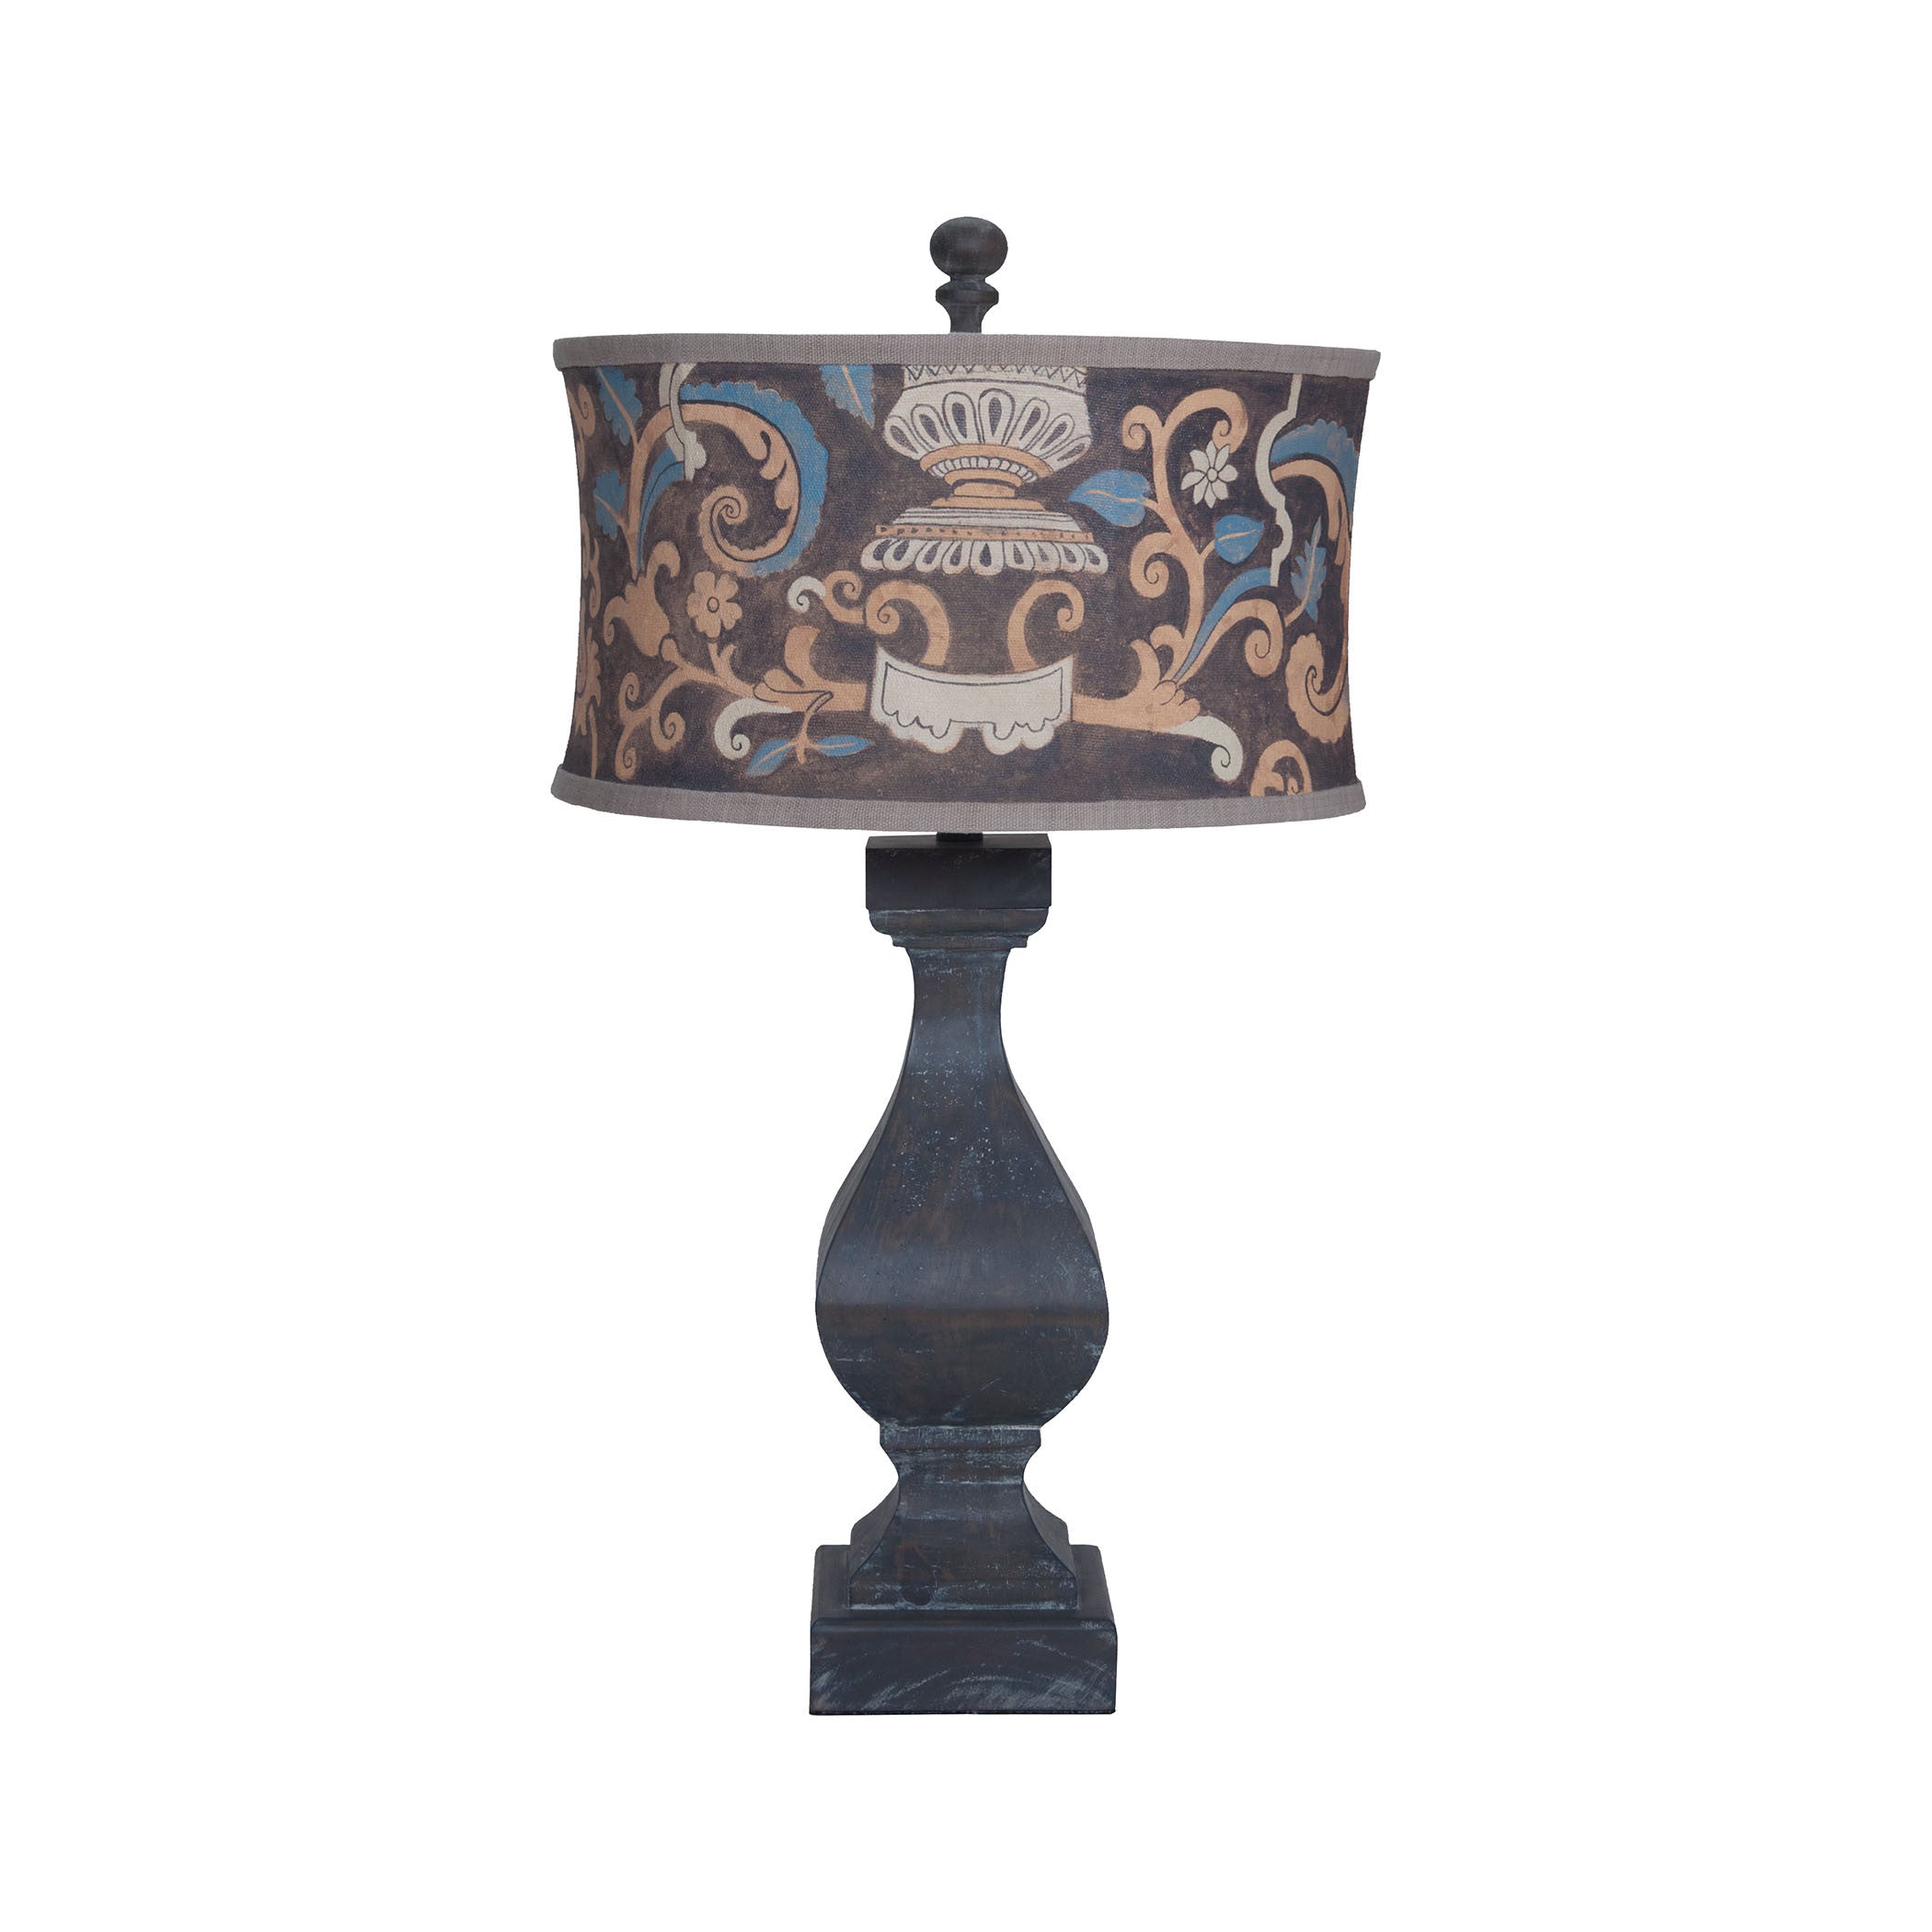 Guildmaster Gui-3516038 Carved Beacon Collection Ash Black Stain Finish Table Lamp